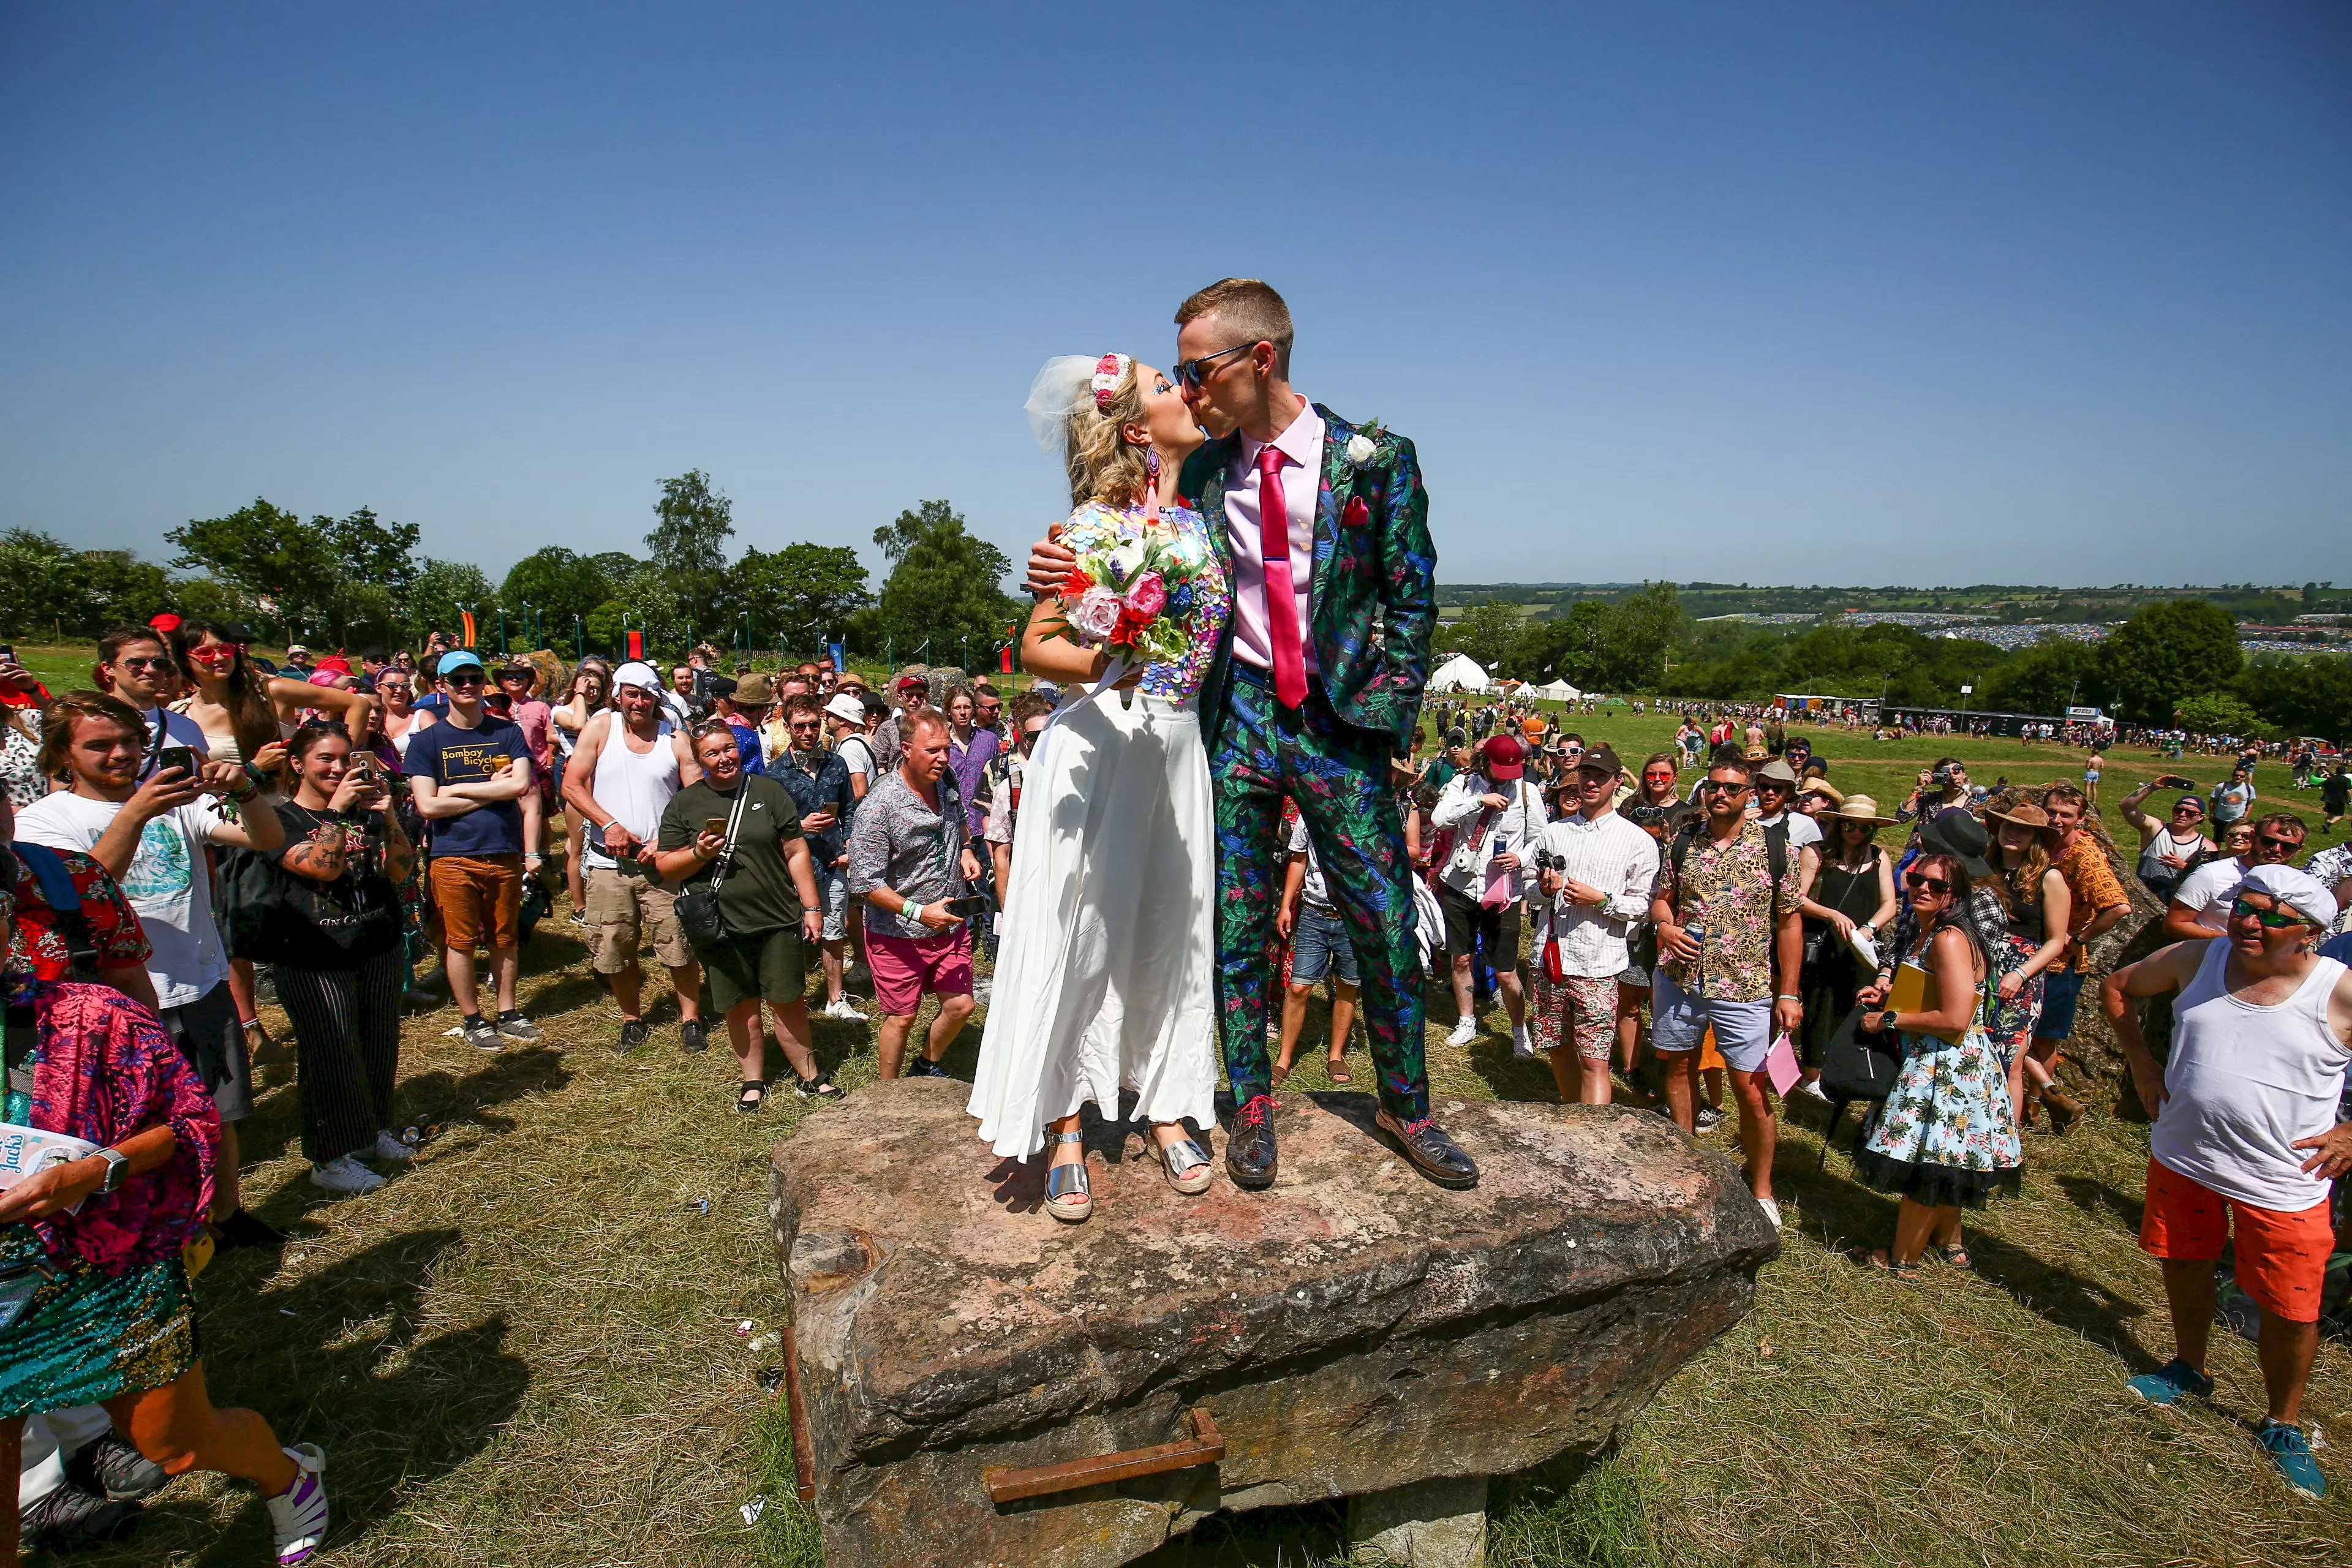 Sarah and Jack married today at Glastonbury.